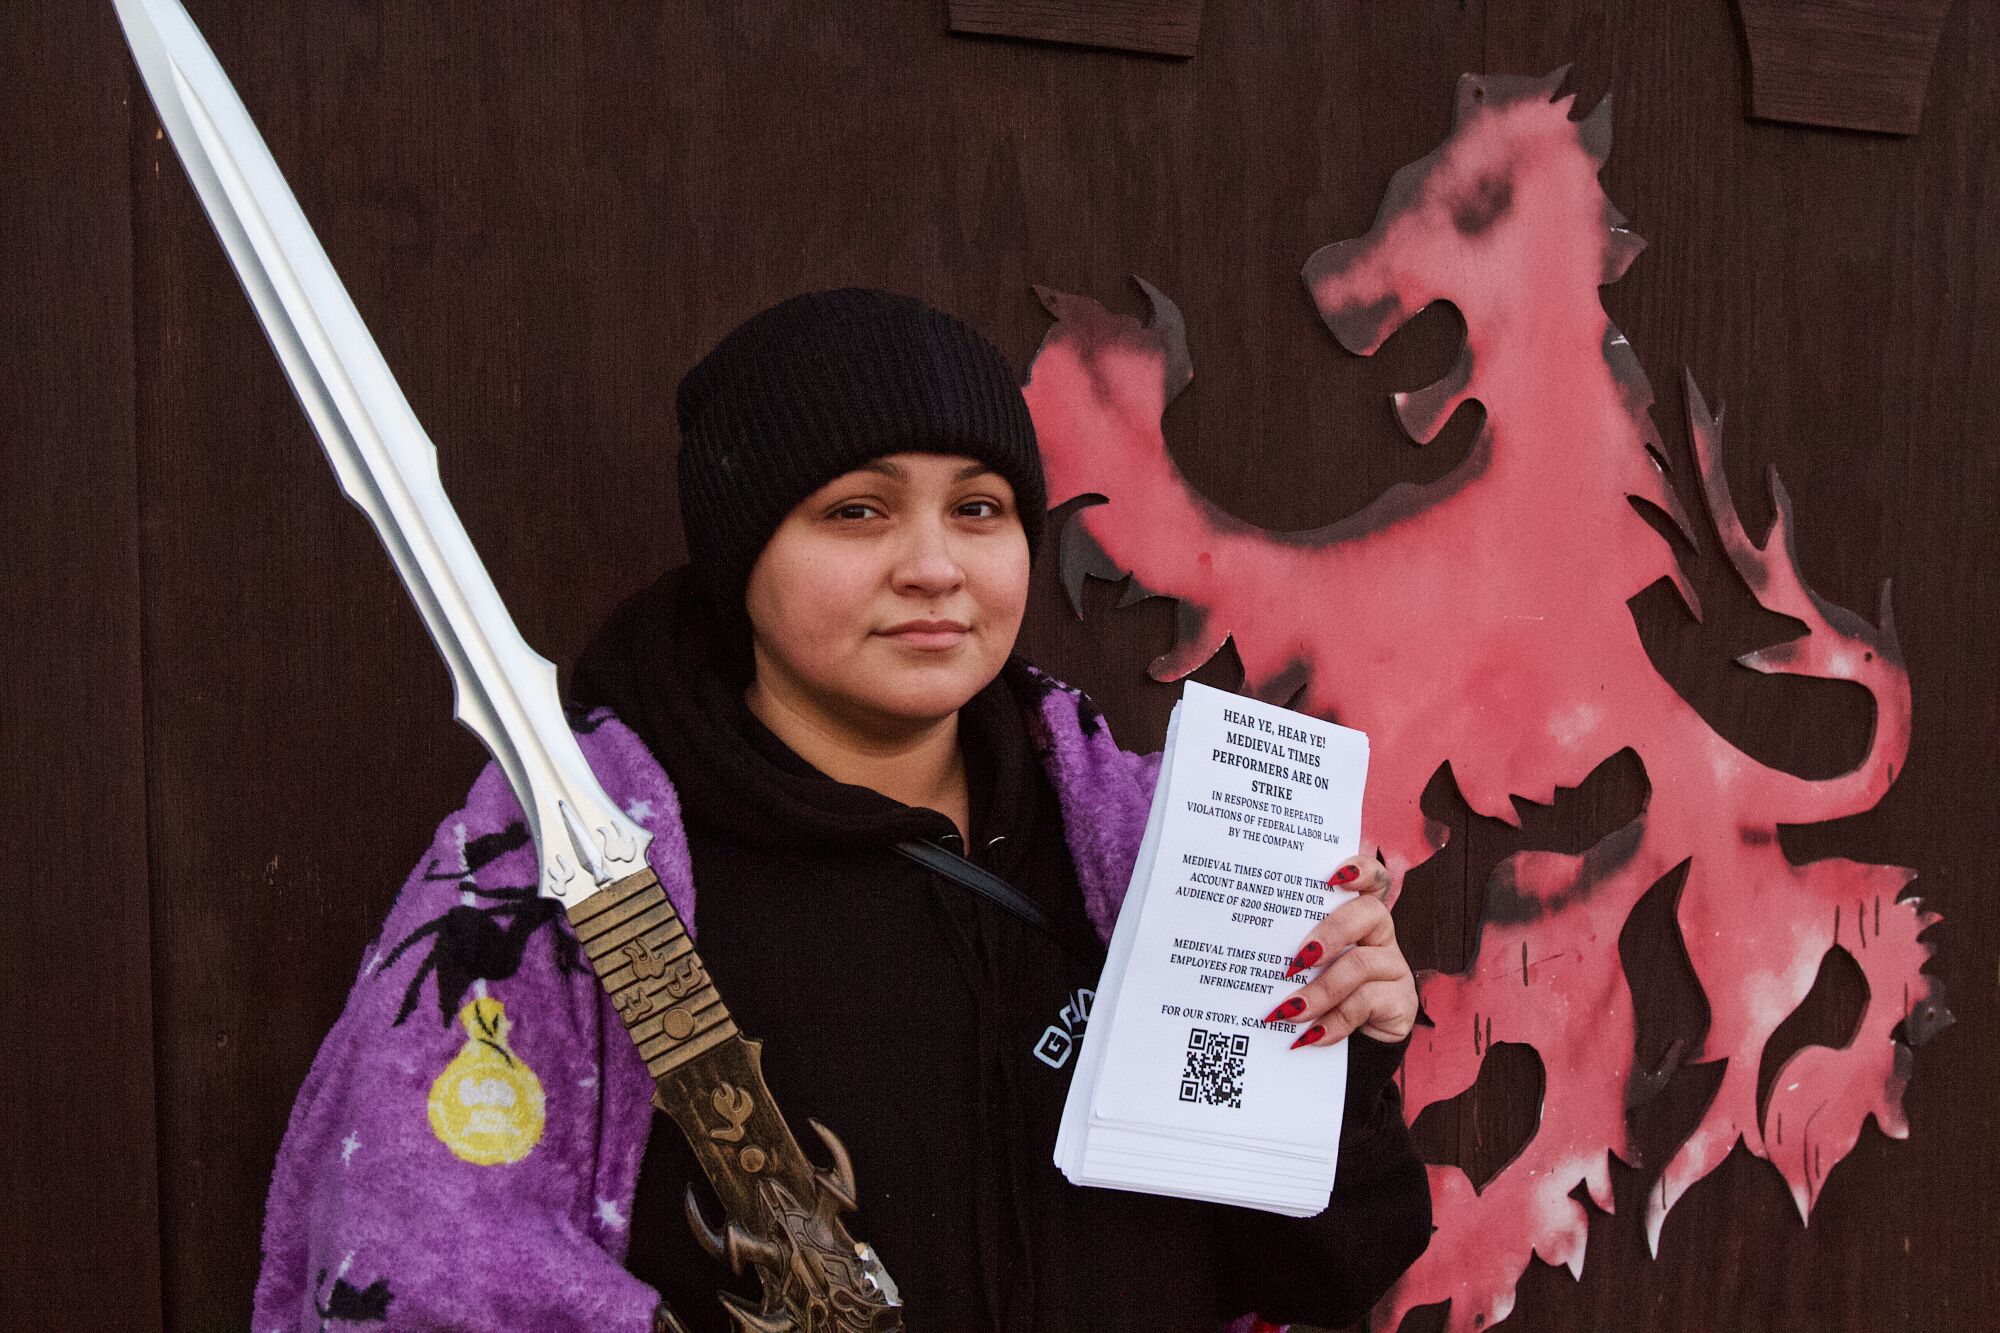 Katherine Calderon holds a fake sword in one hand and a small stack of strike fliers in the other